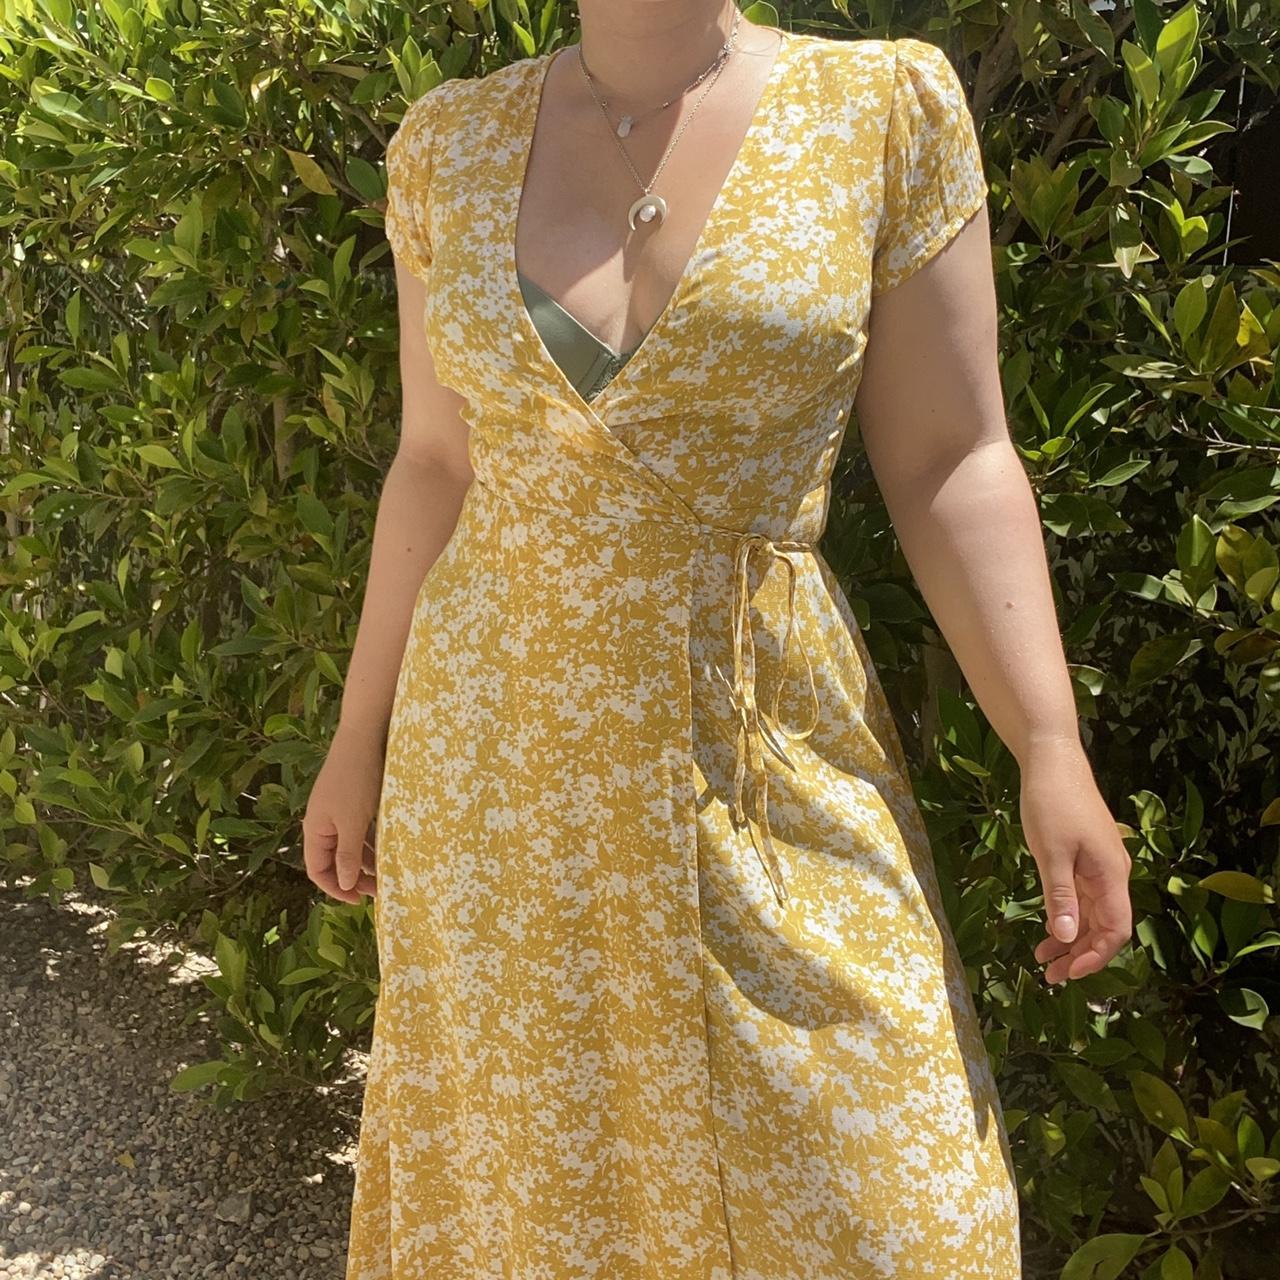 Forever 21 Women's White and Yellow Dress | Depop